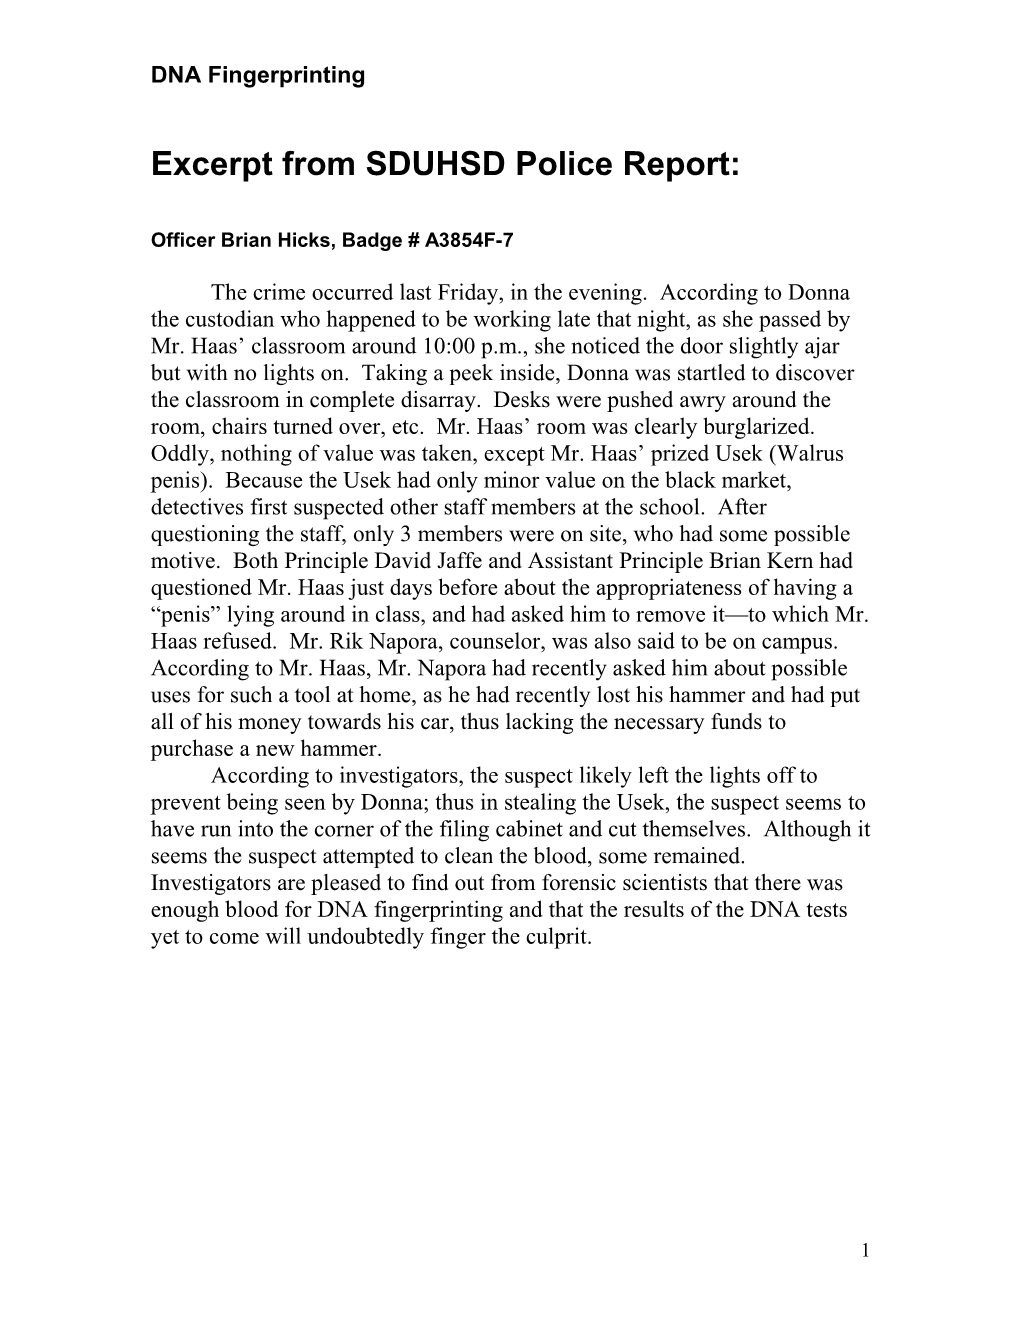 Excerpt from SDUHSD Police Report